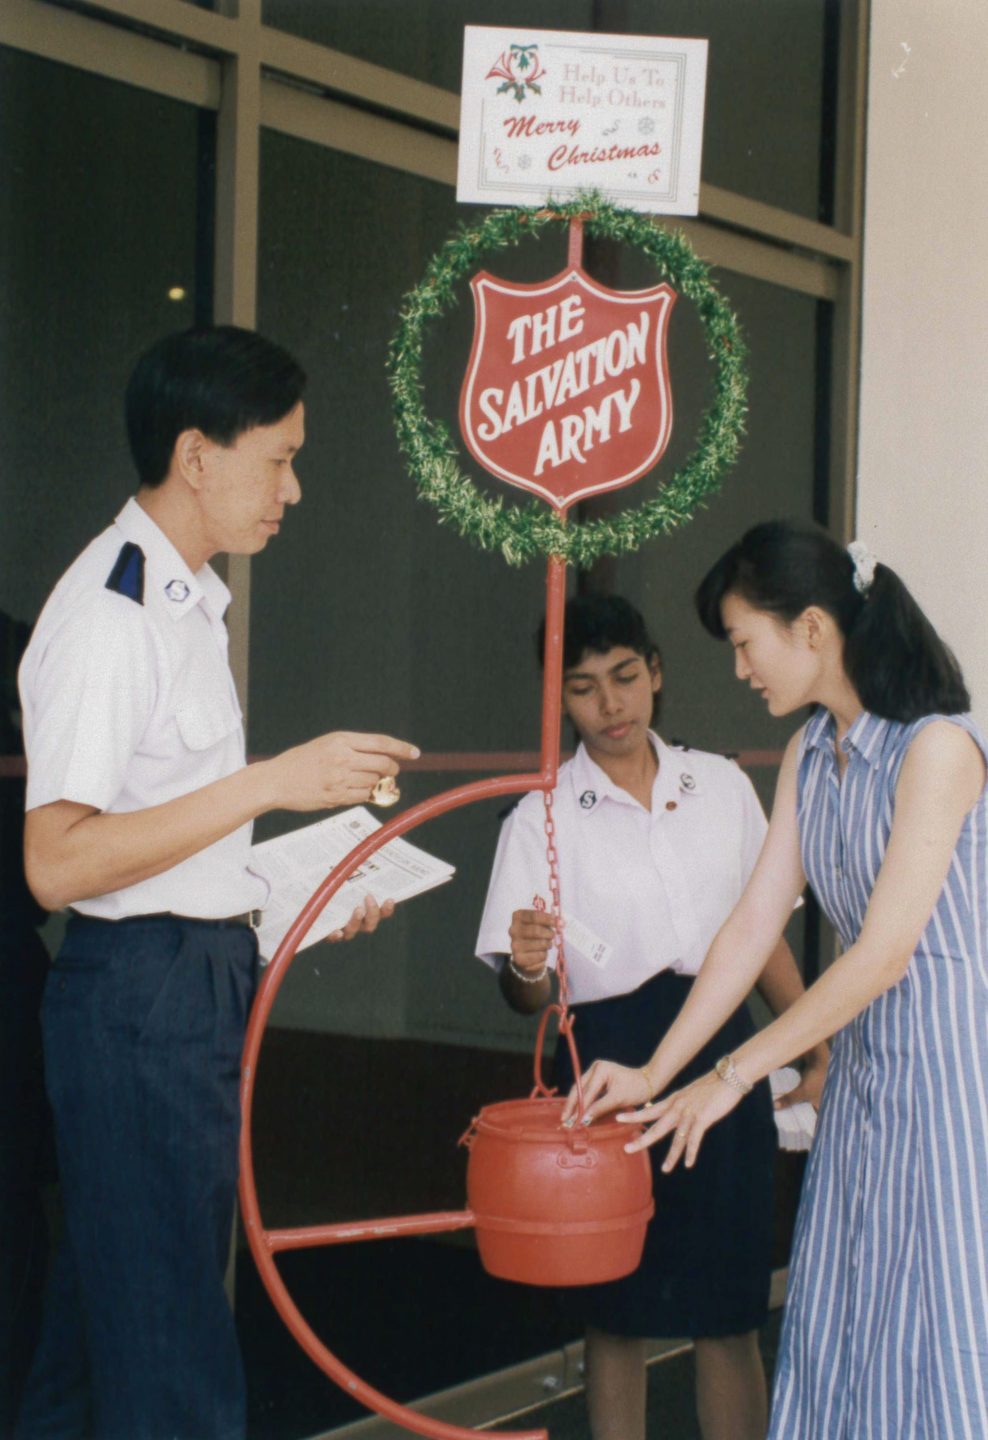 A desire to meet the needs of the poor has seen Vijaya Muniandy (centre) manning the Salvation Army's Christmas Kettle stands for the last 23 years. Photo courtesy of the Salvation Army Singapore.